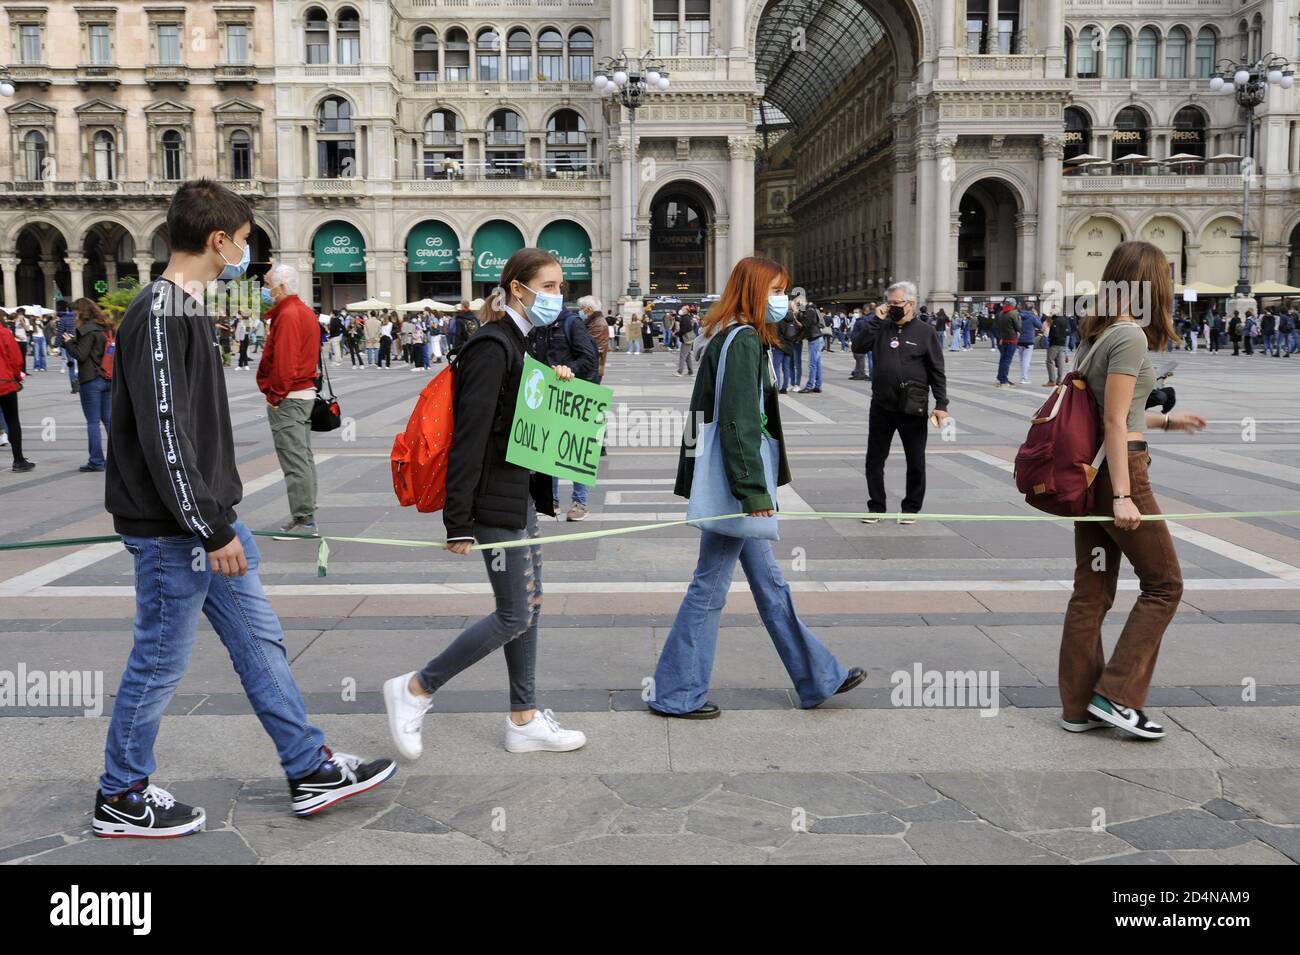 Milan (Italy), October 2020, the young people of Friday for Future, after the interruption due to Covid 19 epidemic, return to the streets to protest against climate change, trying to respect healt security measures. Stock Photo